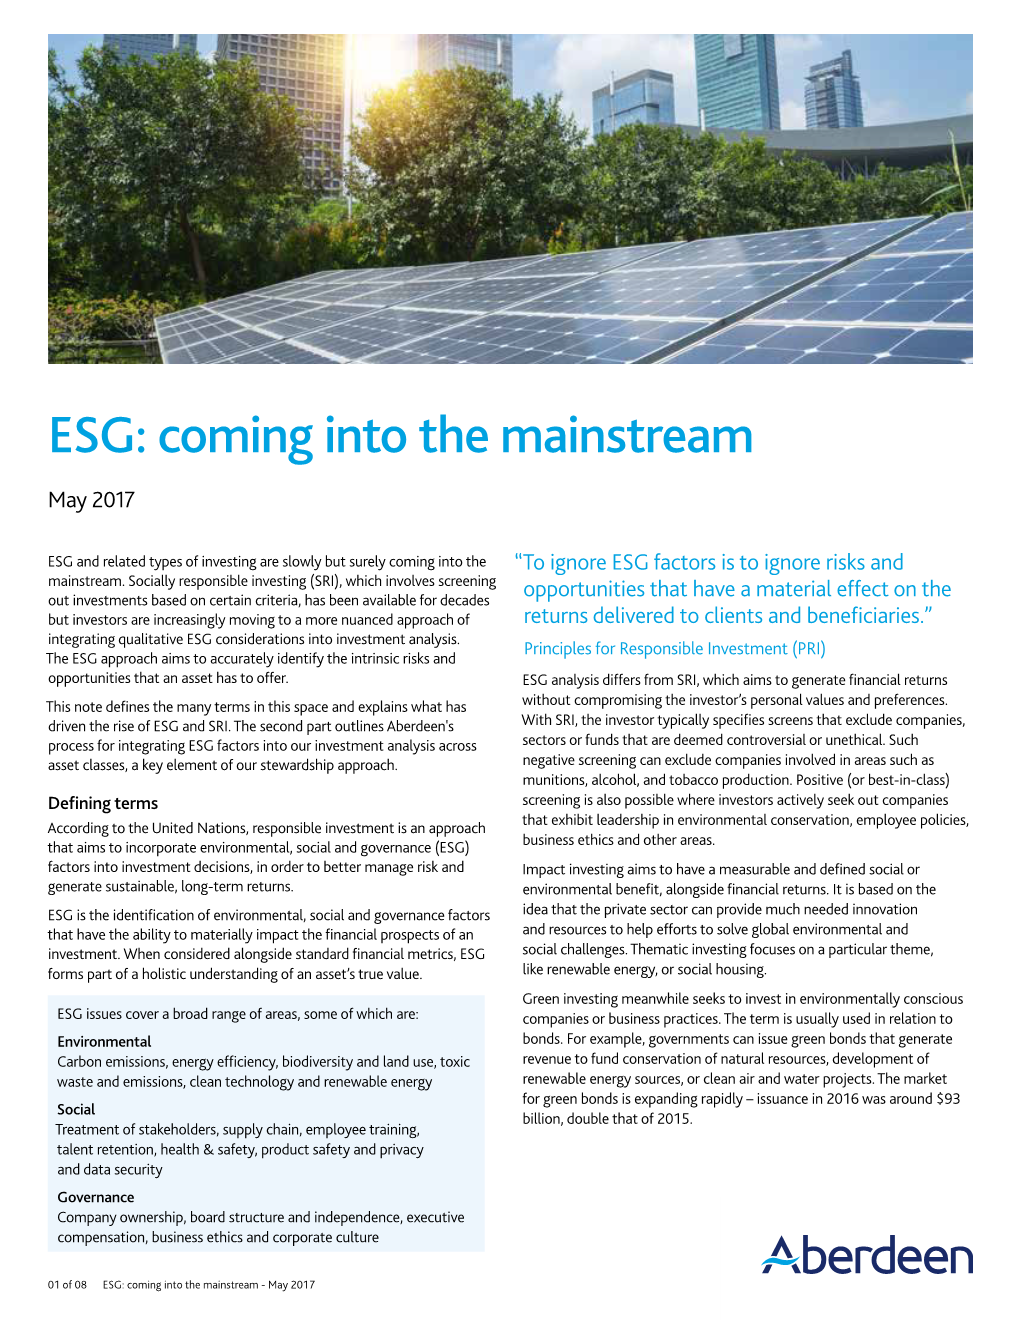 ESG: Coming Into the Mainstream May 2017